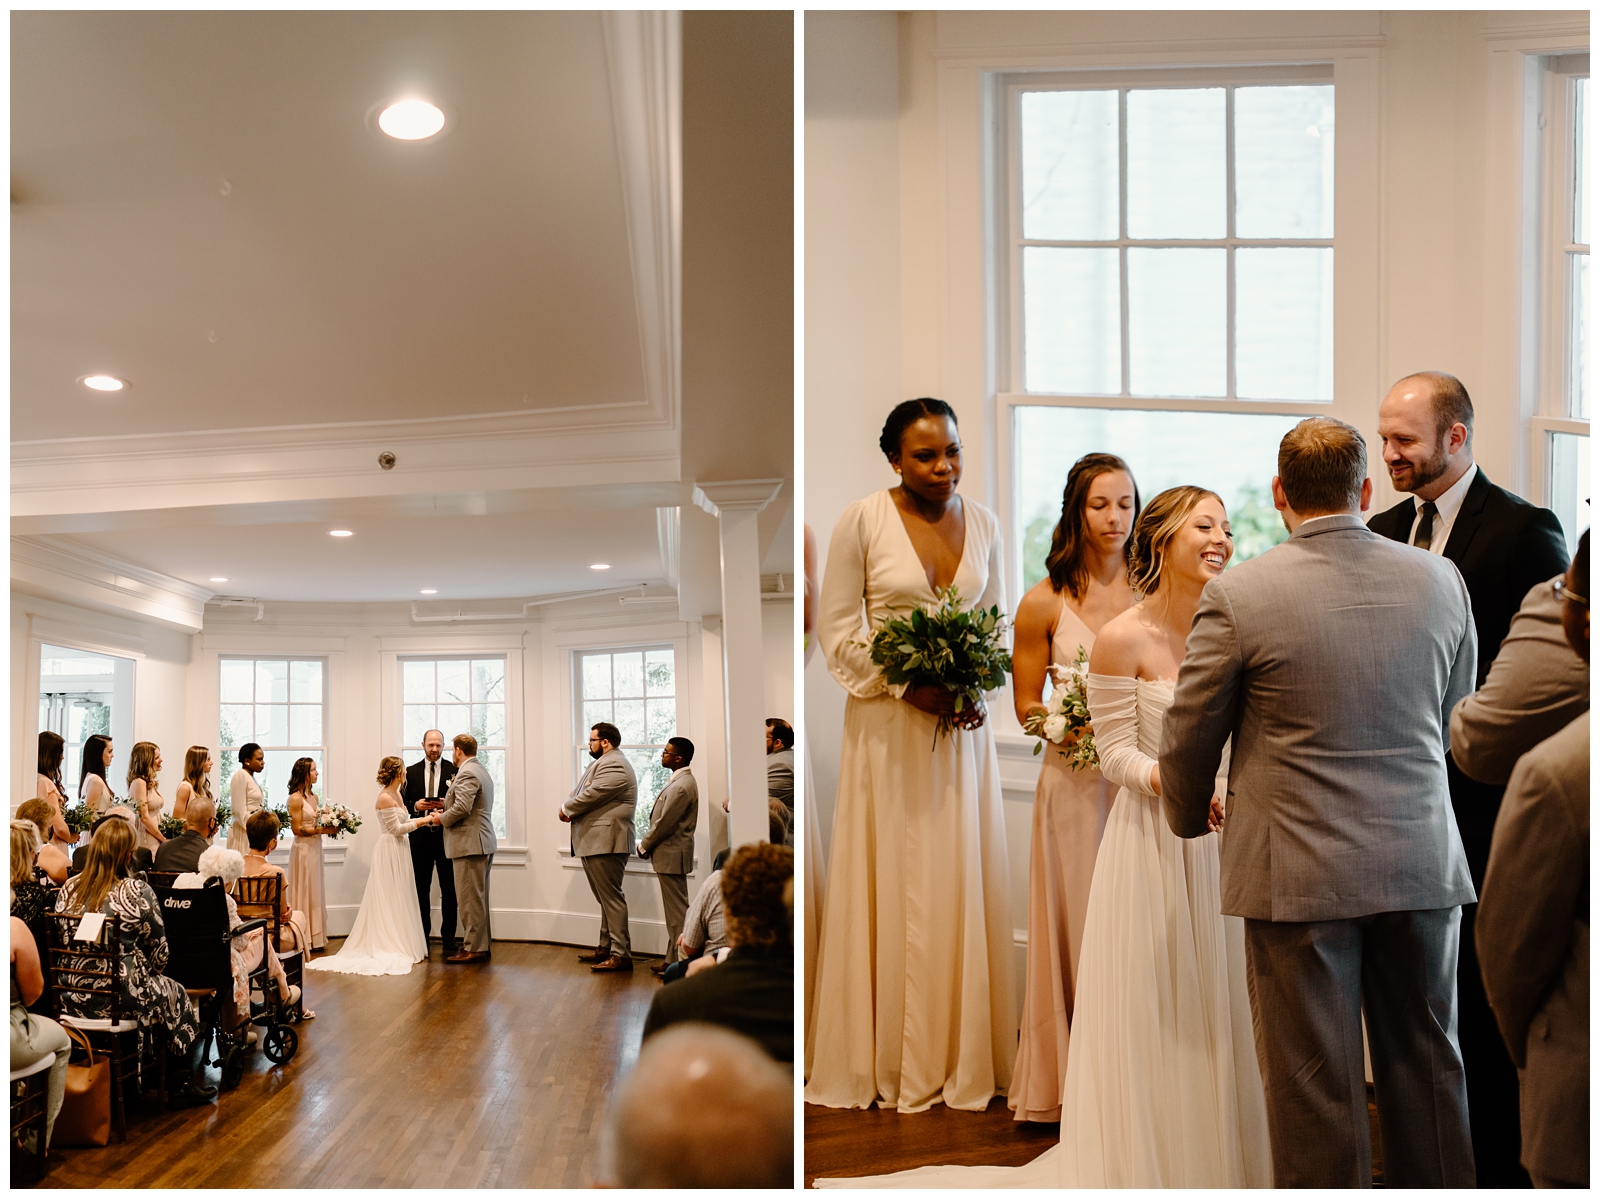 Soft and romantic wedding ceremony inside the historical McAlister-Leftwich House by Greensboro NC photographer